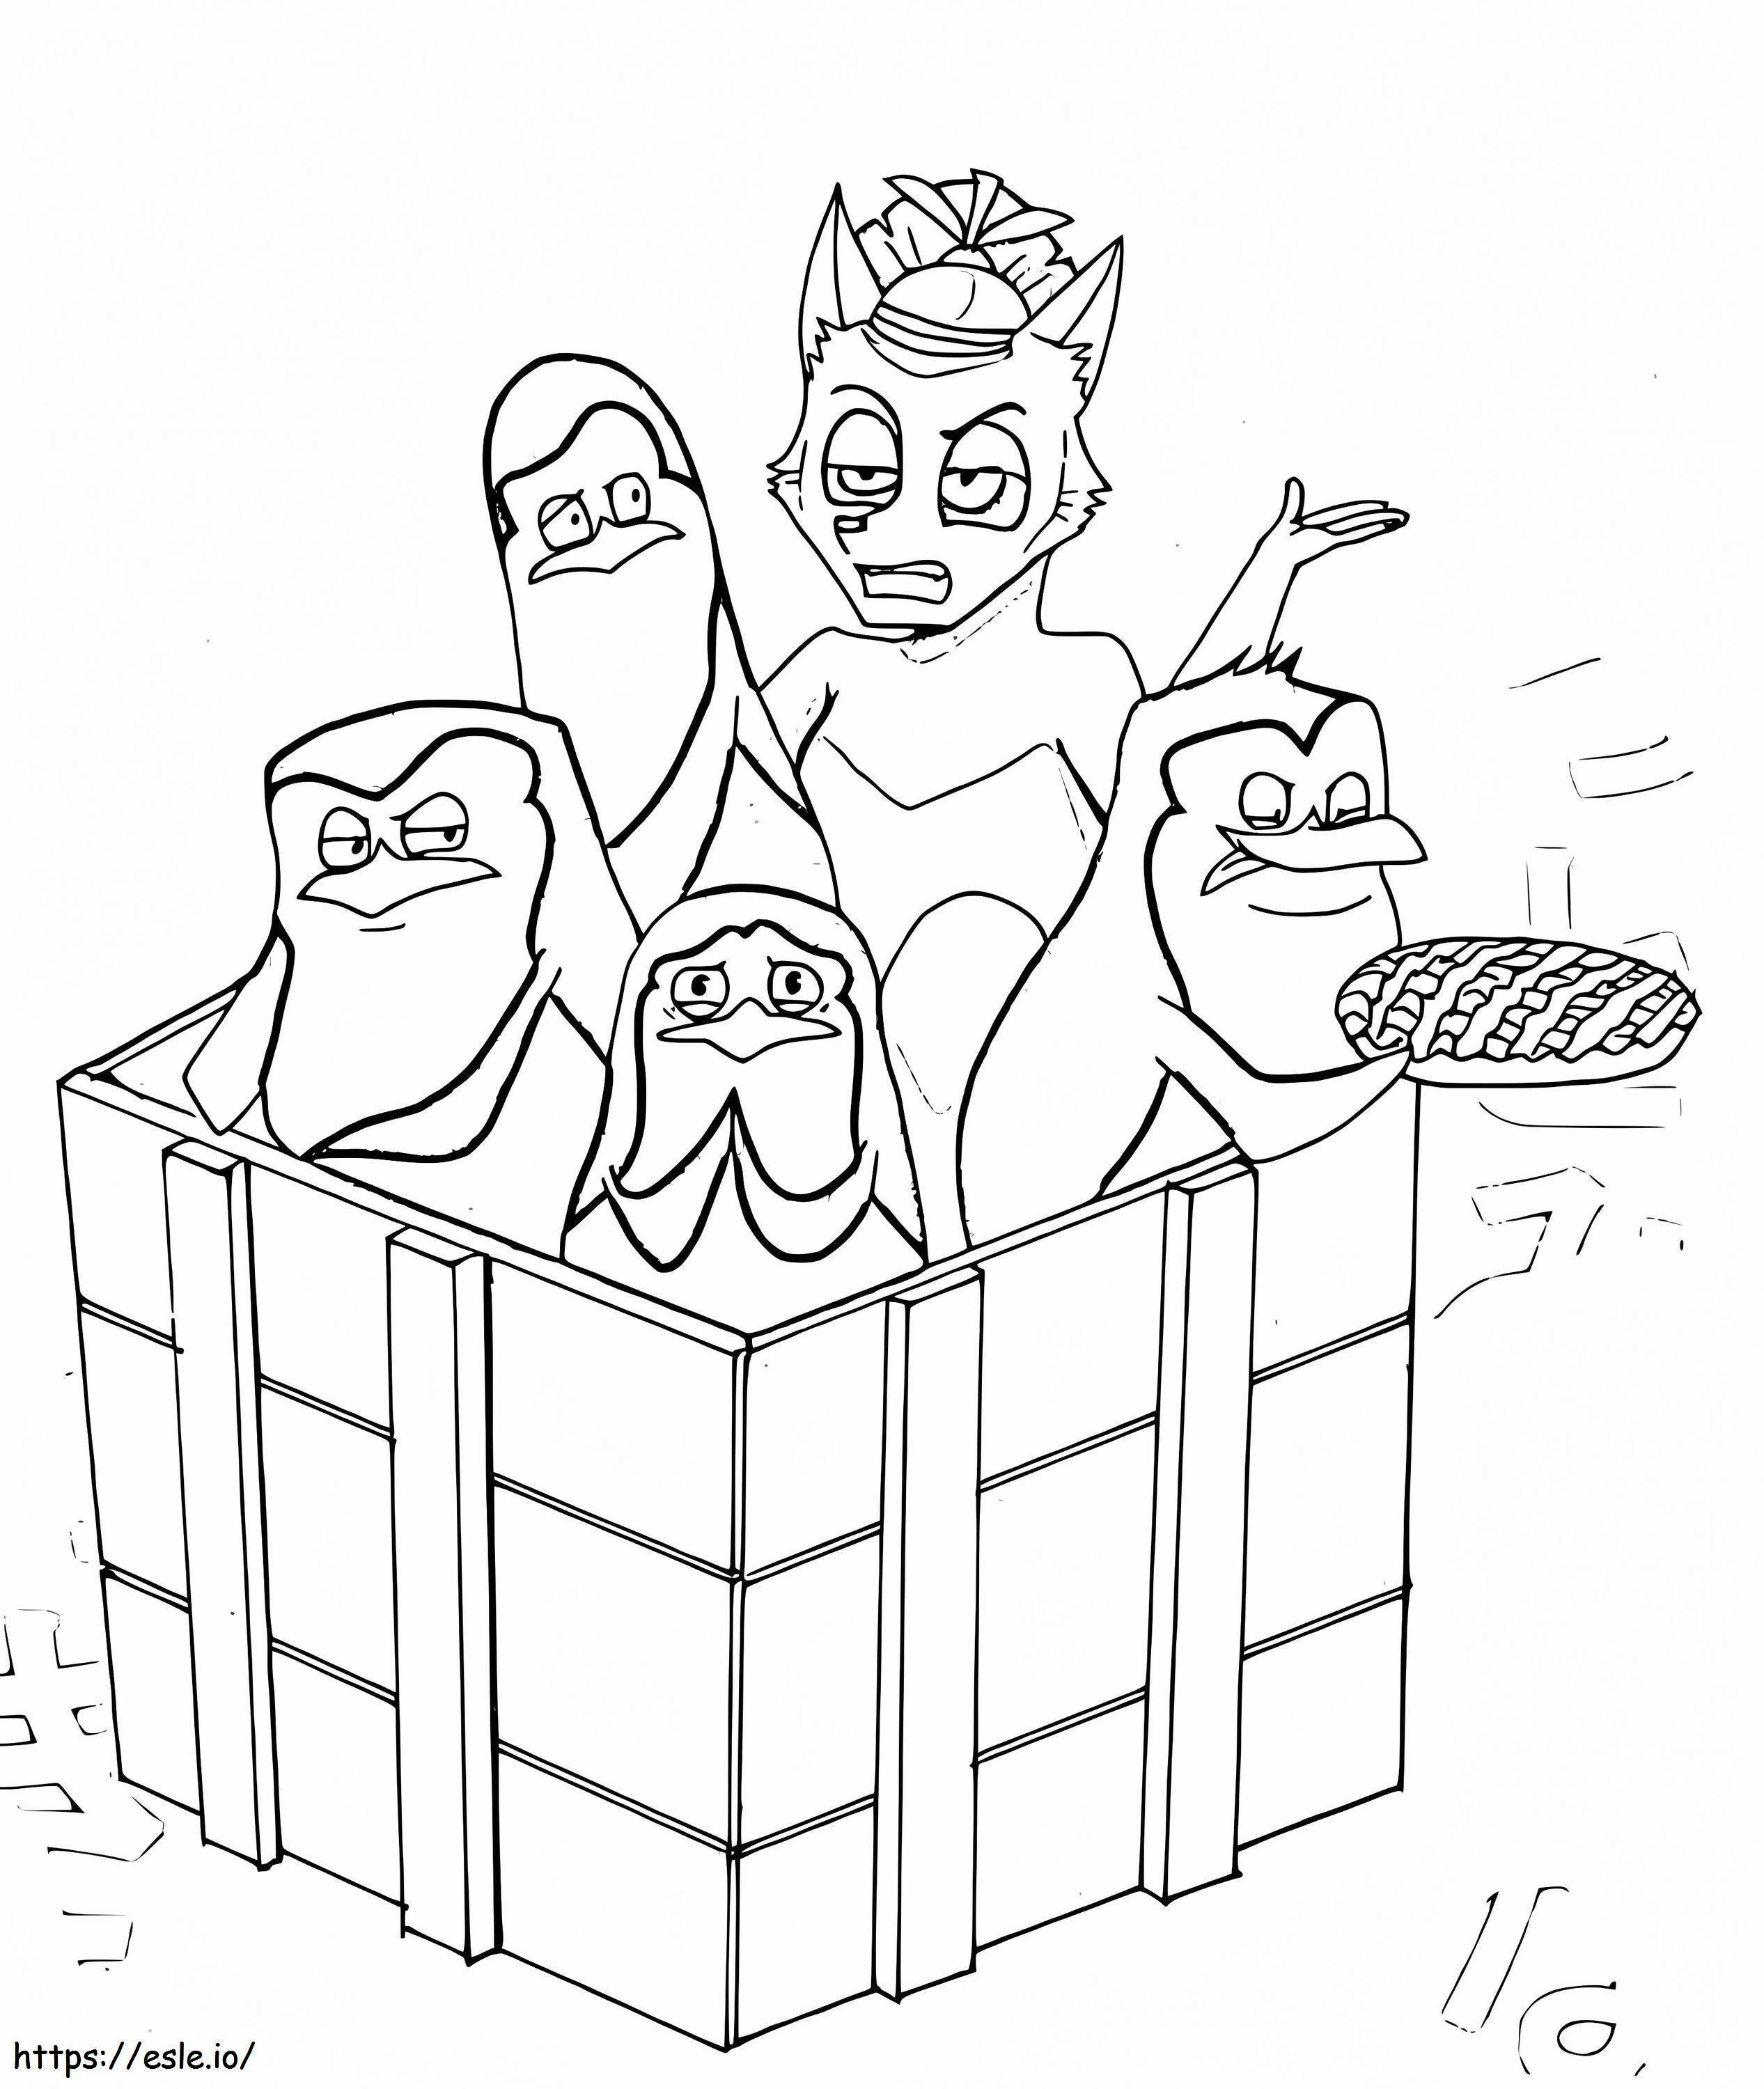 Penguins Of Madagascar Free Printable coloring page